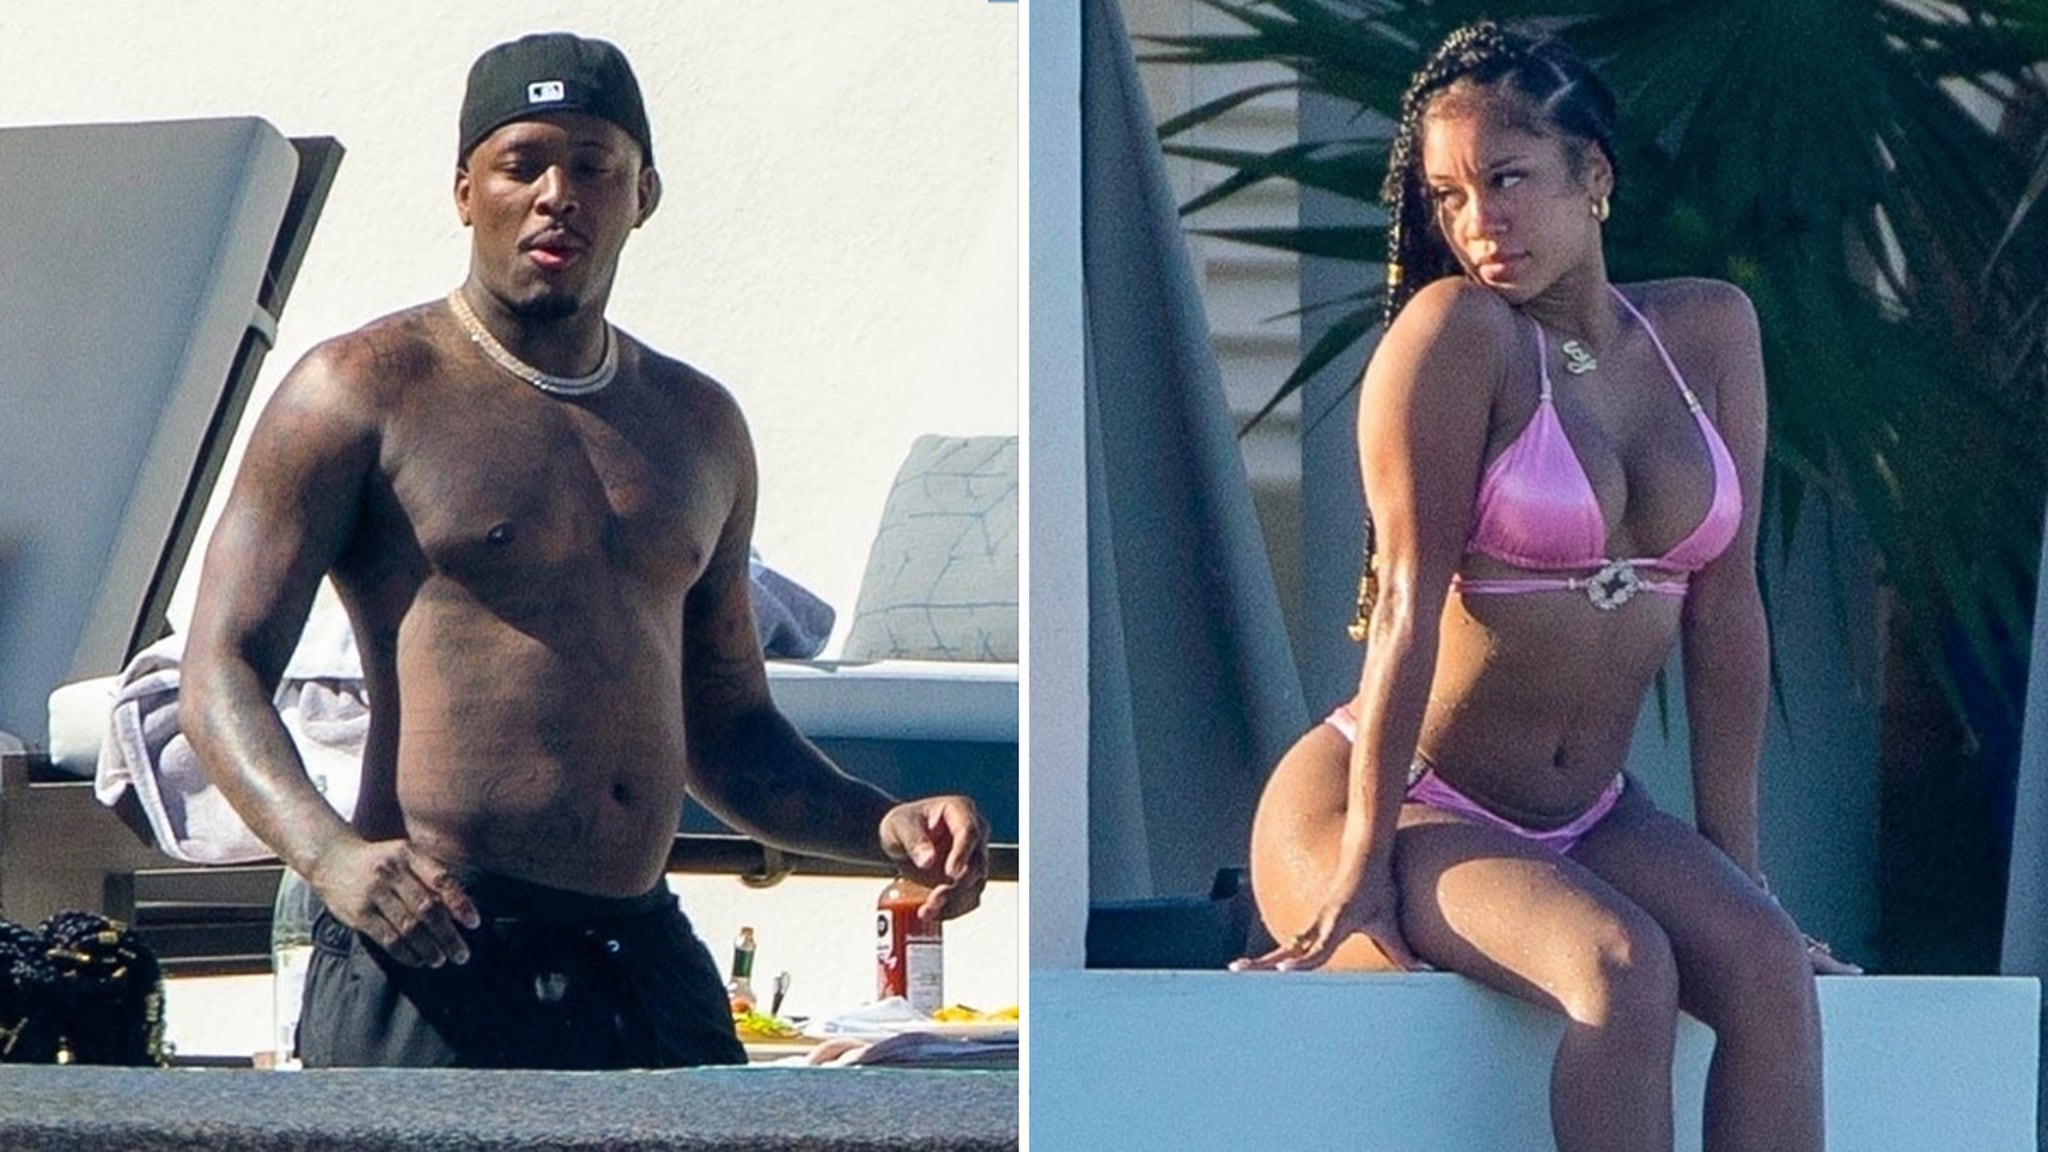 YG and Saweetie Romantic Mexican Getaway Pics Confirm They’re Dating